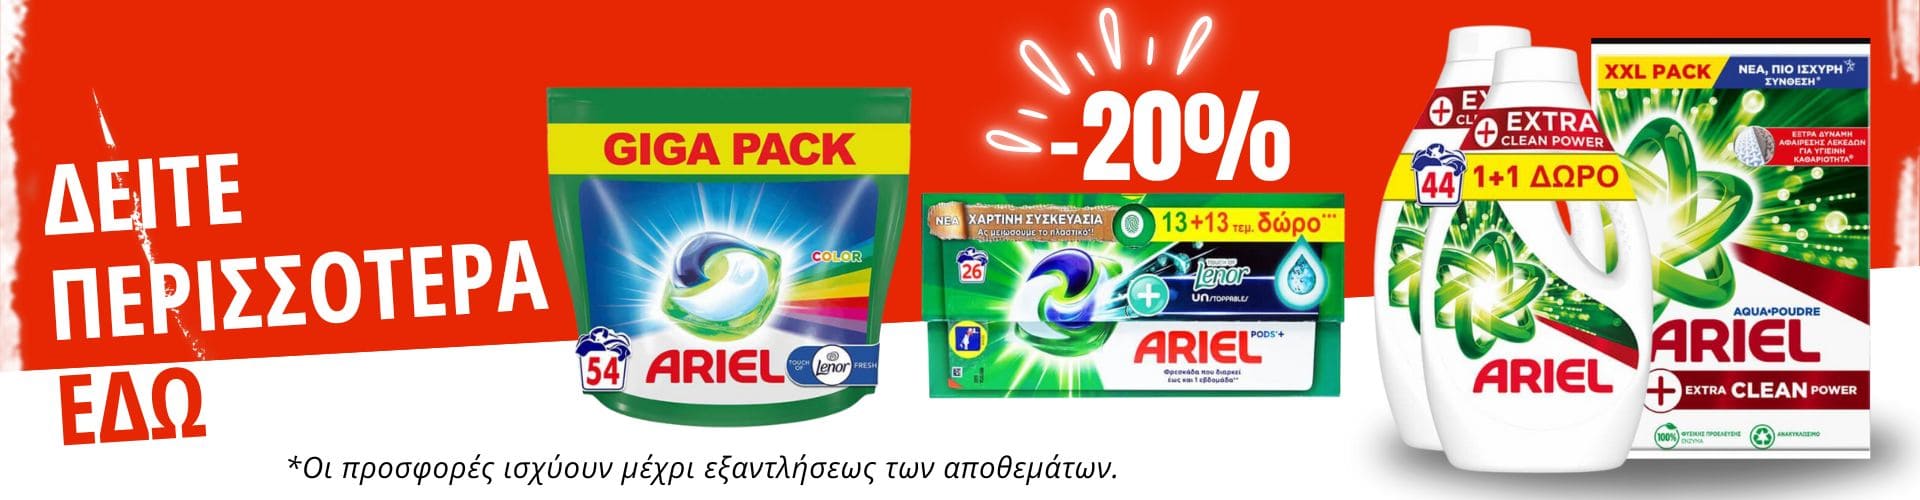 ariel_products_banner